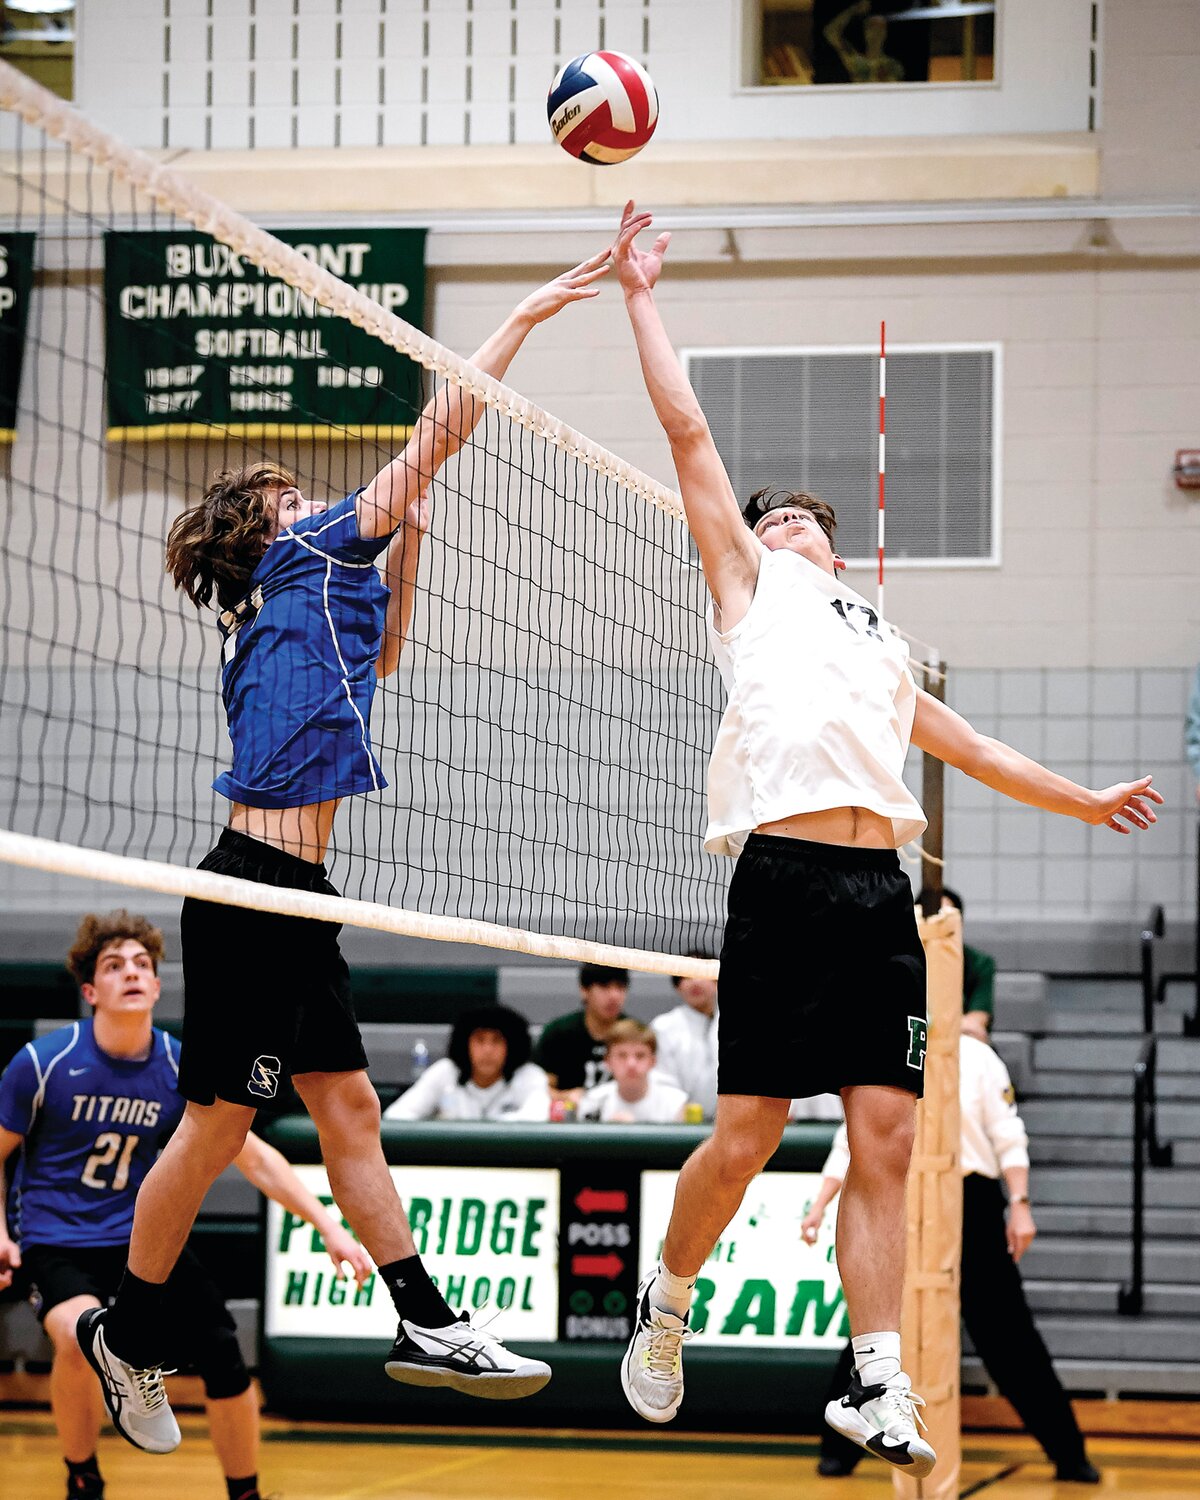 CB South’s Brody Cocca tips a return over the out stretched arm of Pennridge’s Evan Jalosinski.